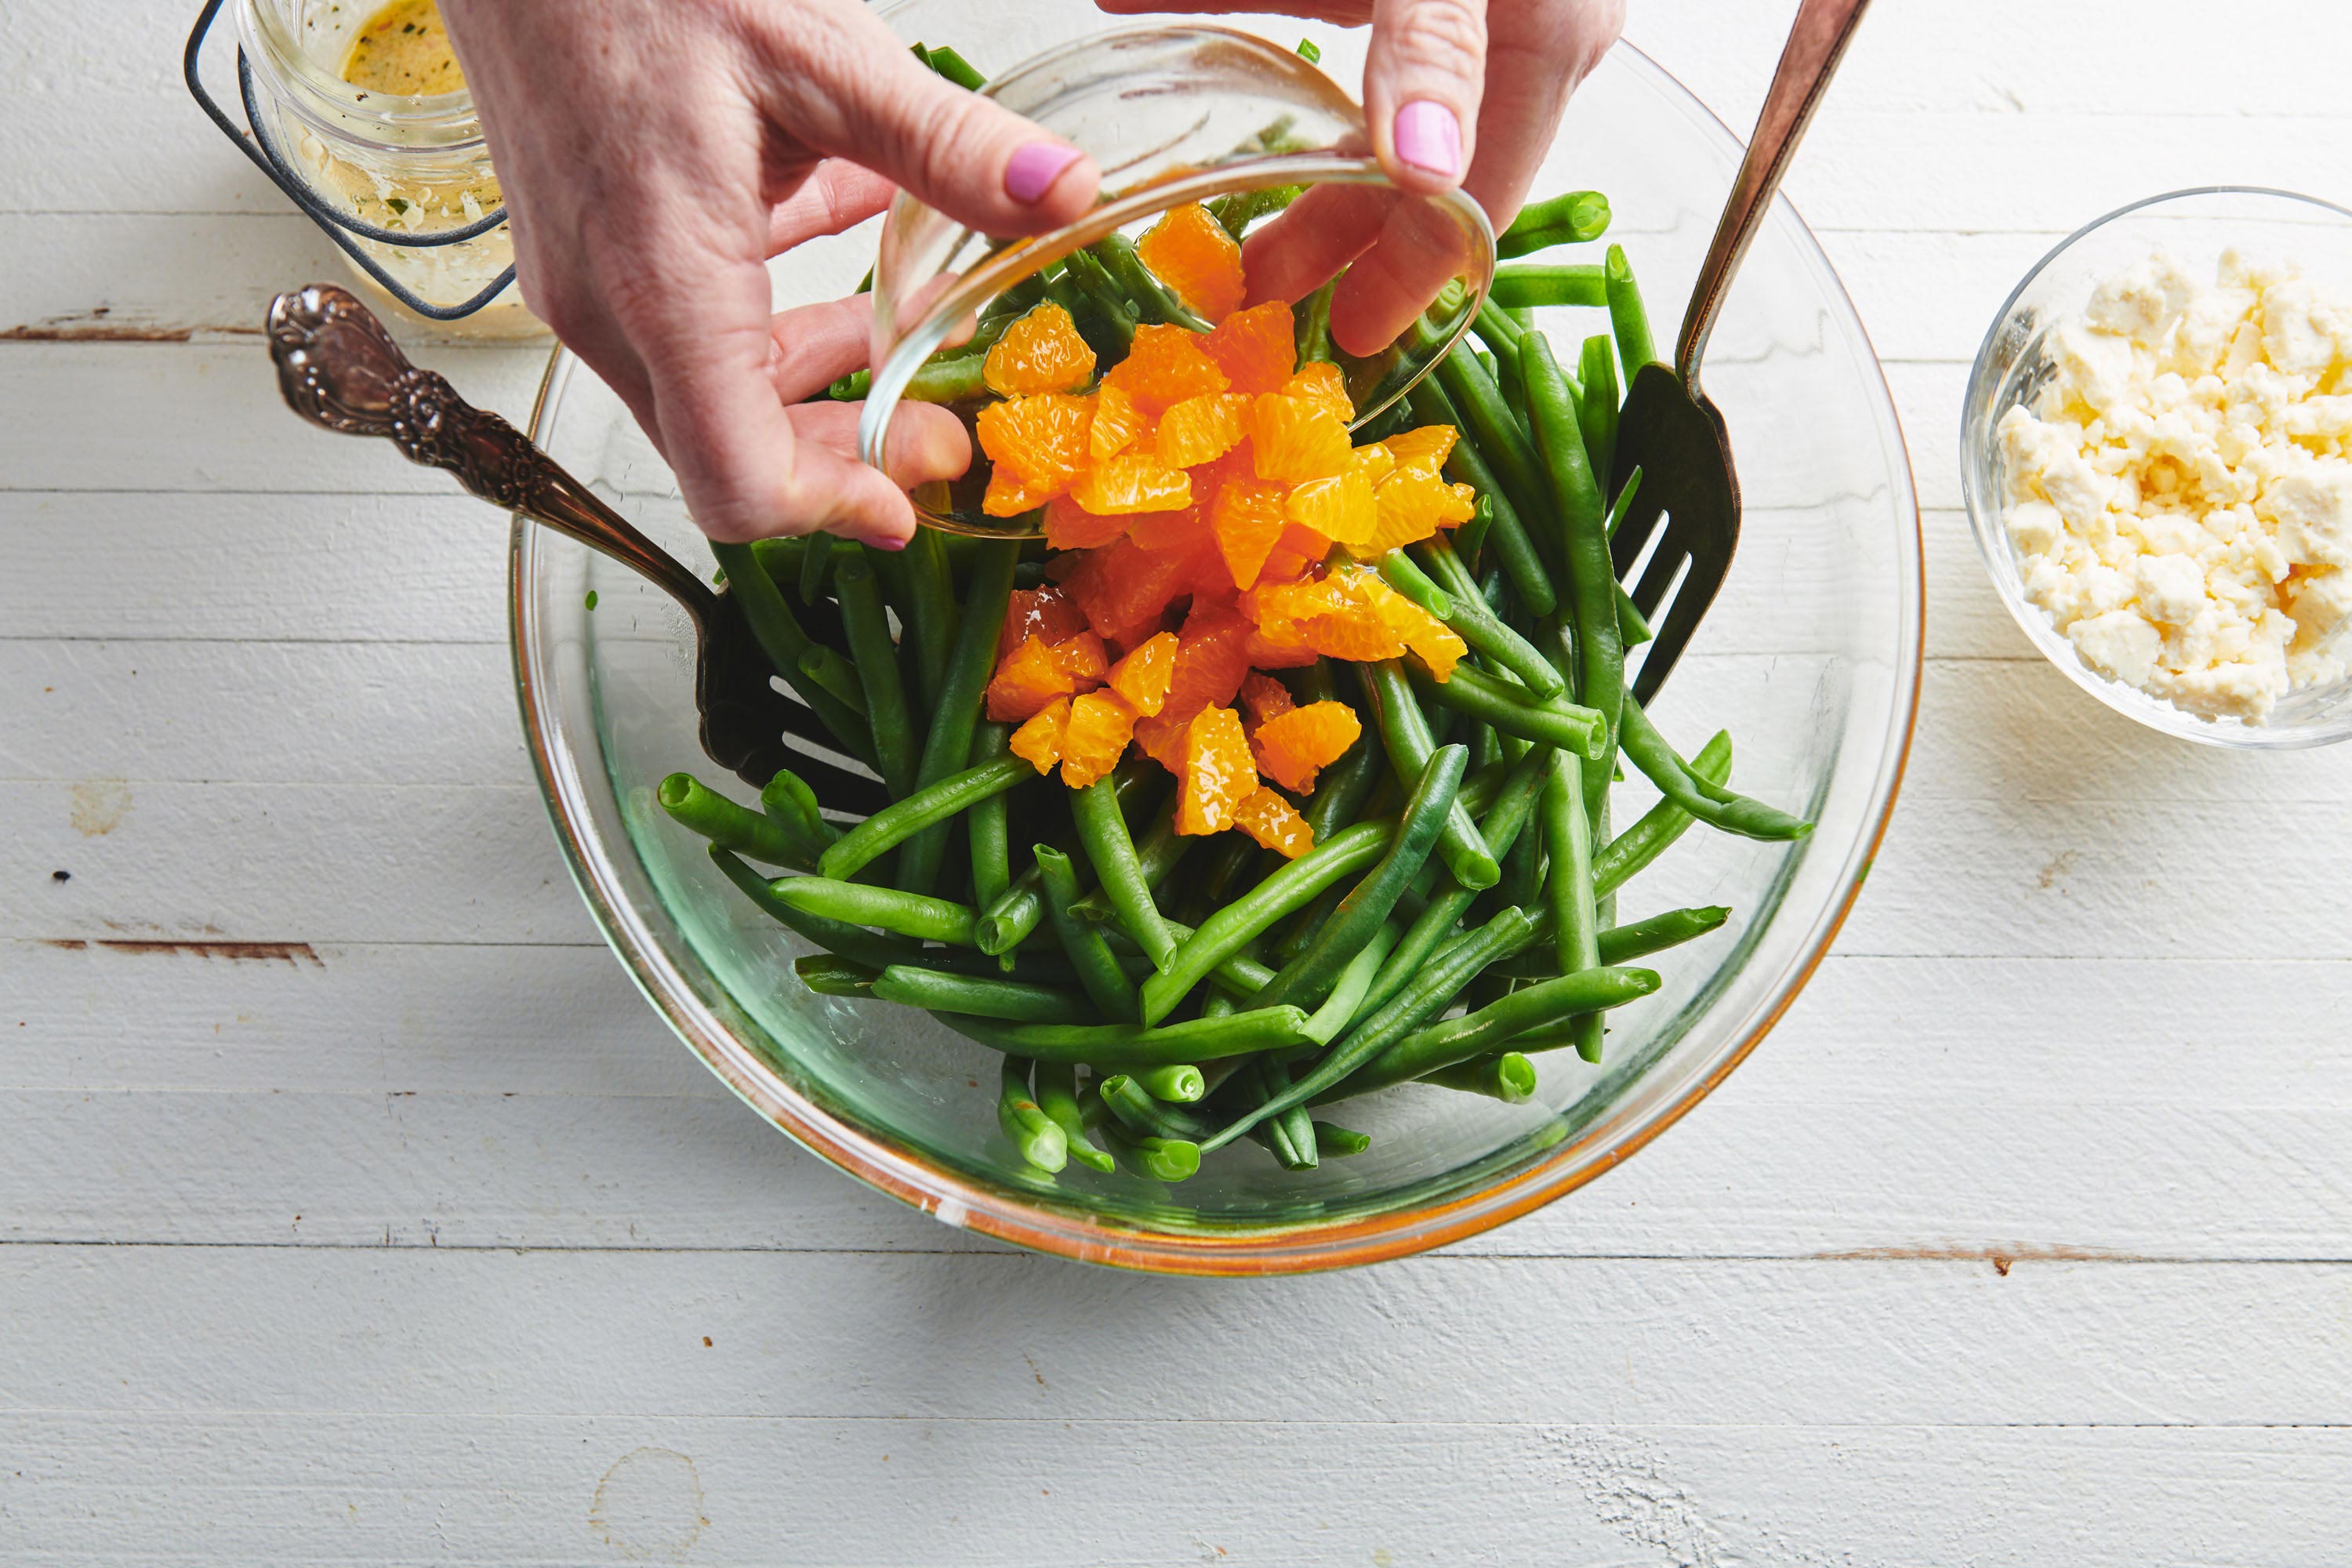 Woman pouring Clementine Oranges into a bowl of green beans.